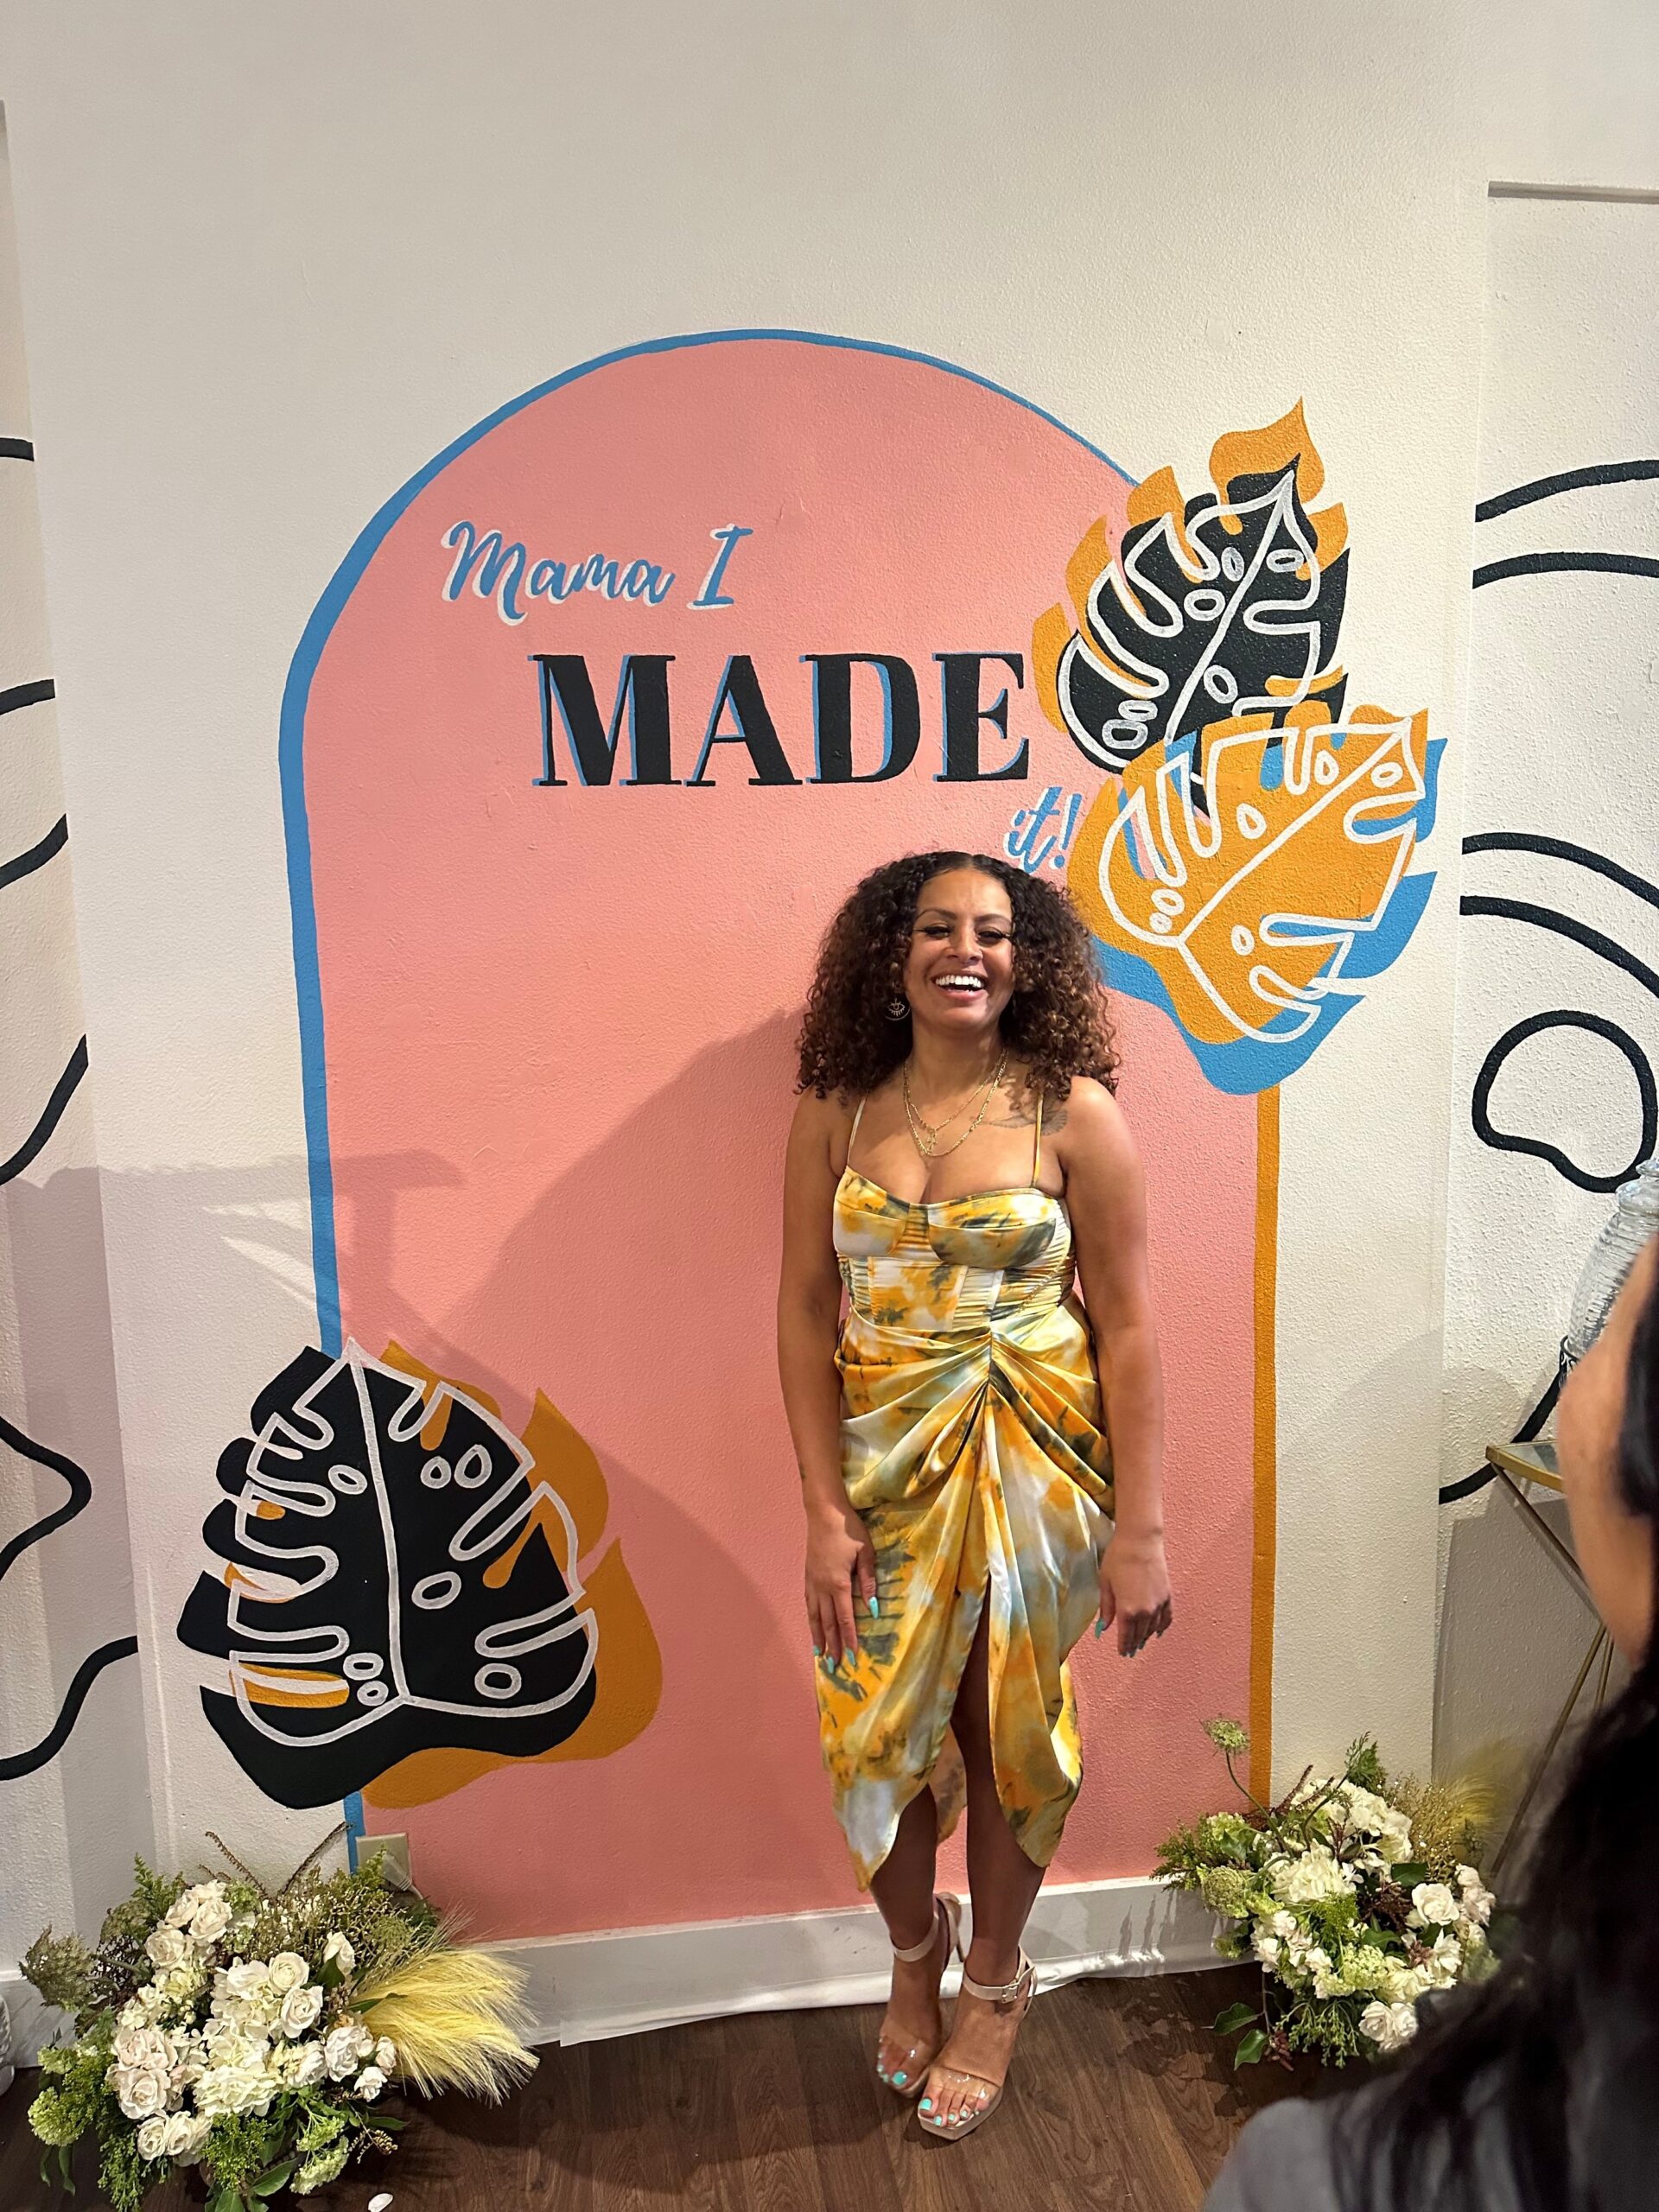 woman wearing a floral sundress stands in front of a decorated wall that says "mama I made it" 